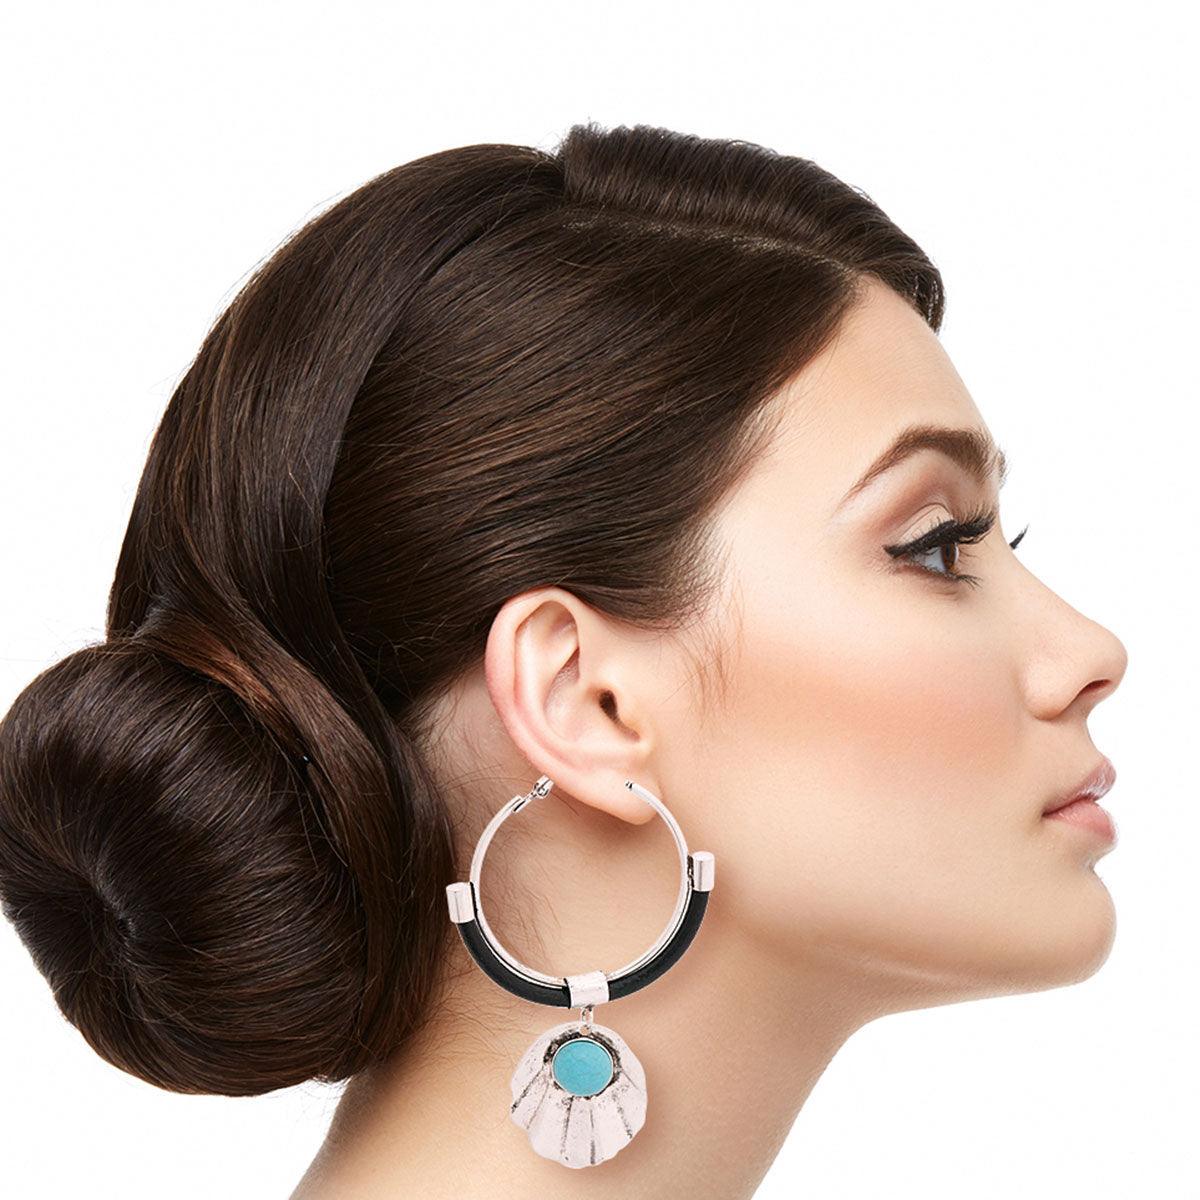 Burnished Silver Hoops: Add Vibrant Turquoise Charm to Any Look